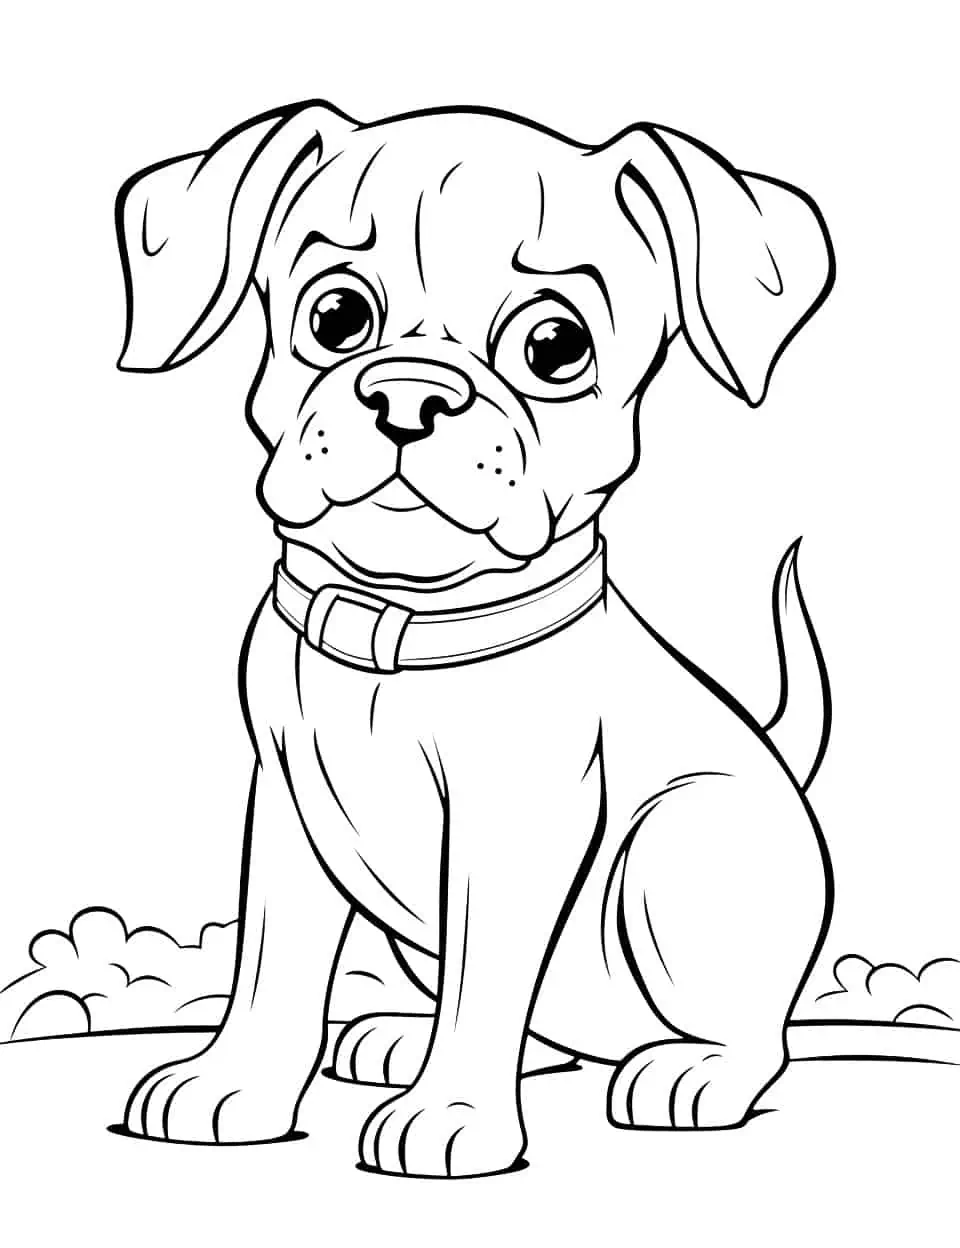 Big Ears Boxer Coloring Page - A funny coloring page of a Boxer dog sitting outdoors wearing a collar.